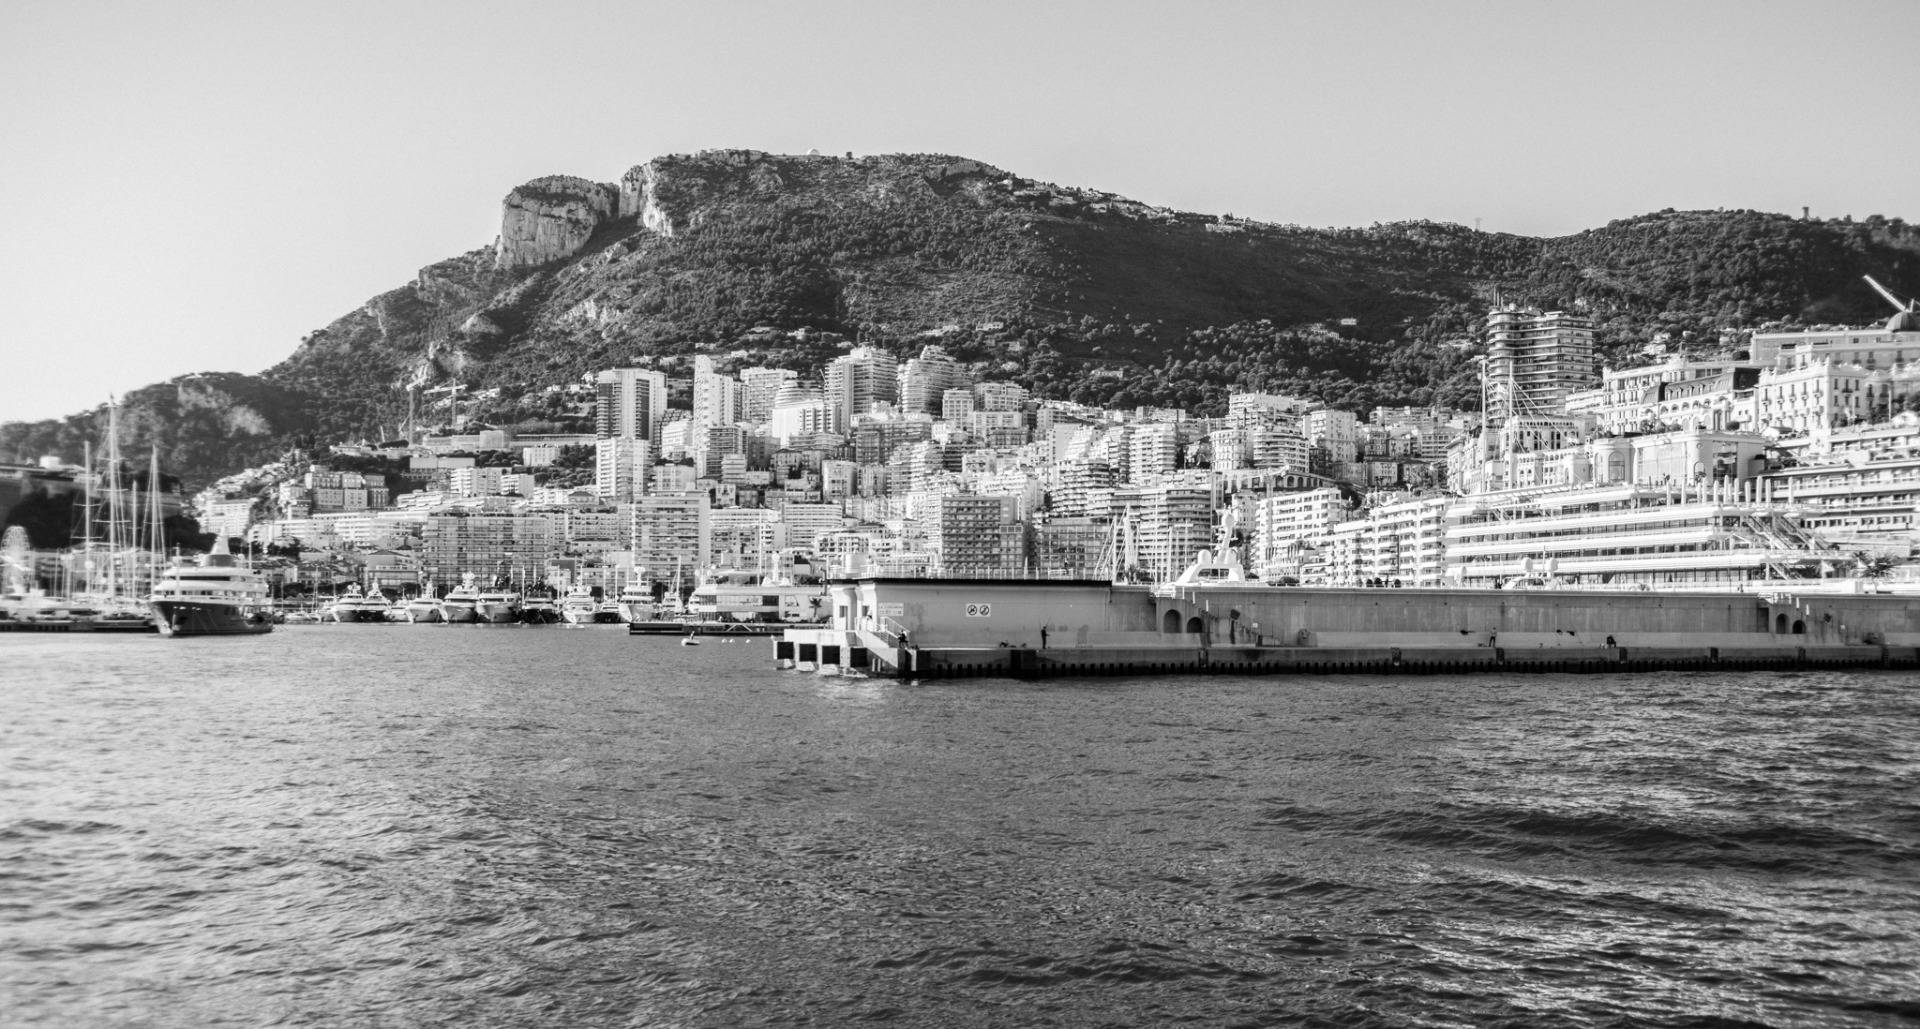 Wow! Isn’t Monaco amazing? All hail the new gods: the God of Concrete and the God of Capitalism.